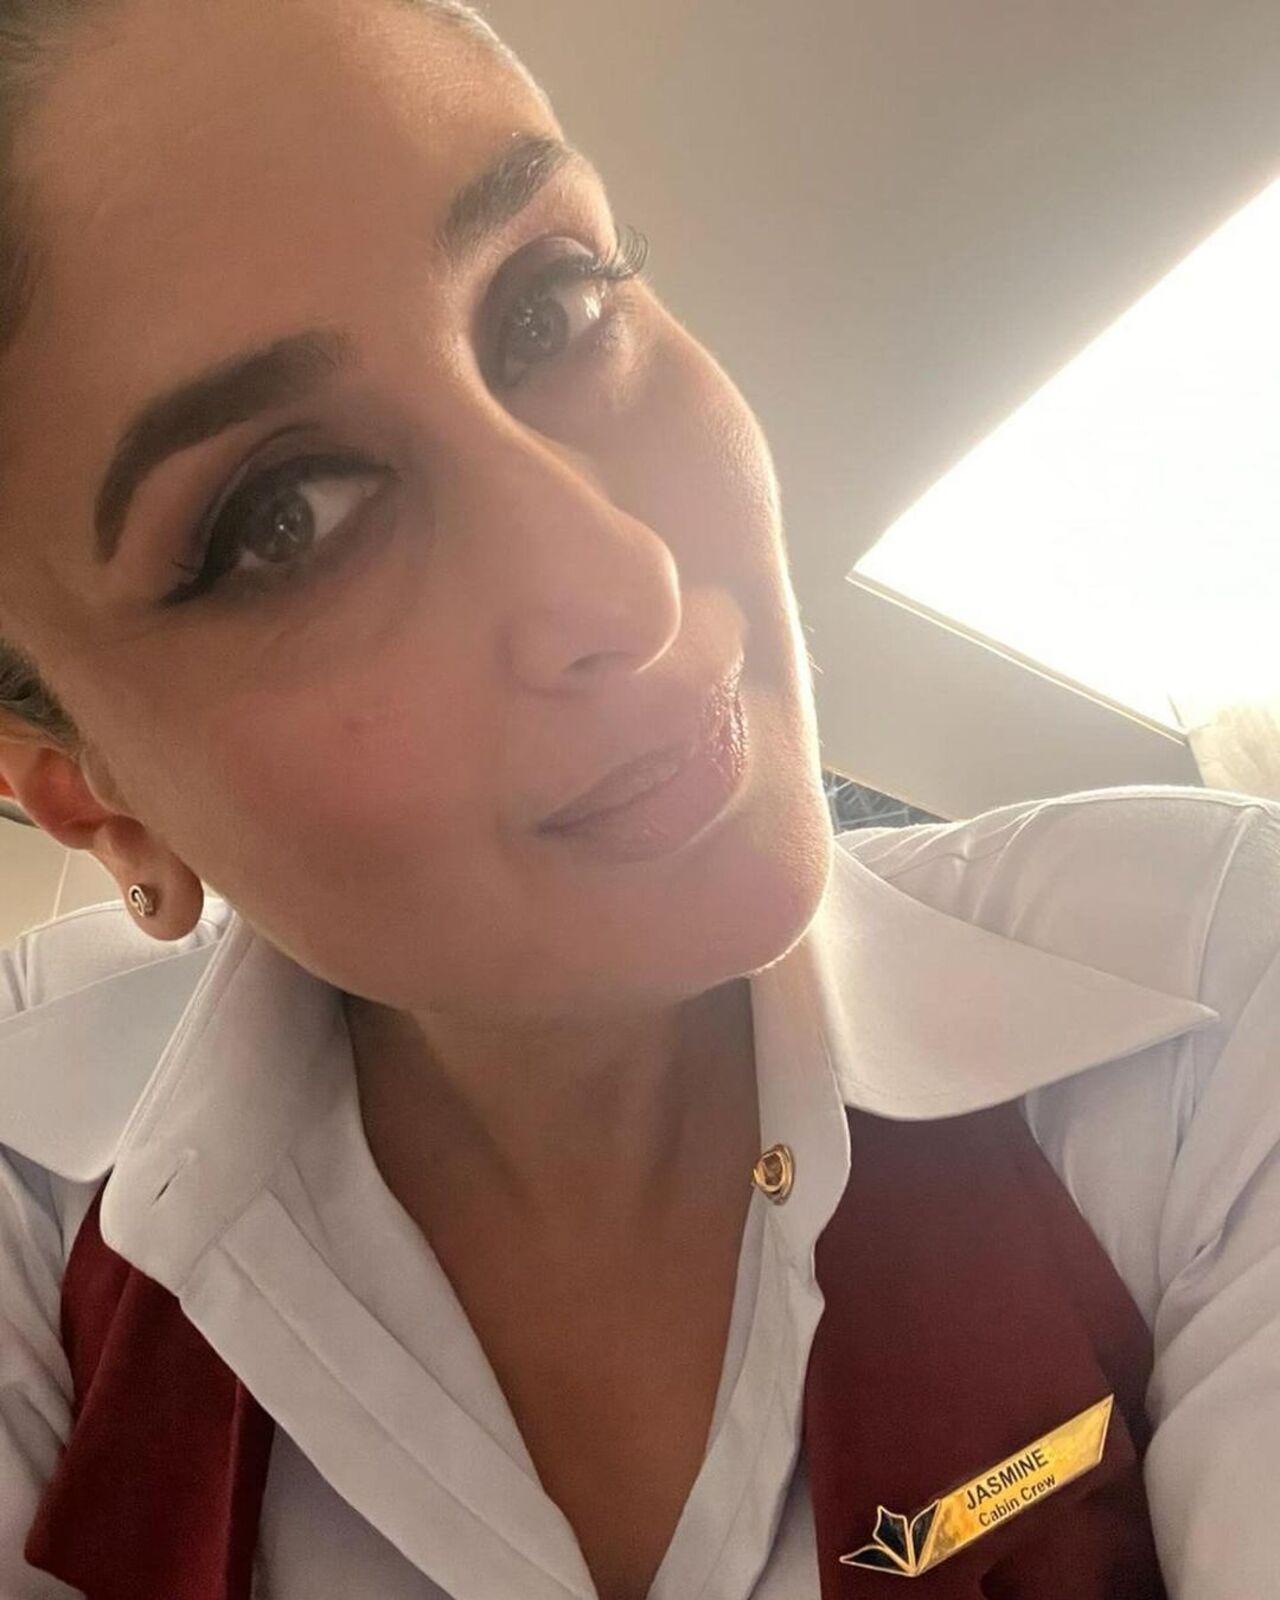 Bebo also shared a picture that shows her name tag ‘Jasmine’ as a cabin crew member. 